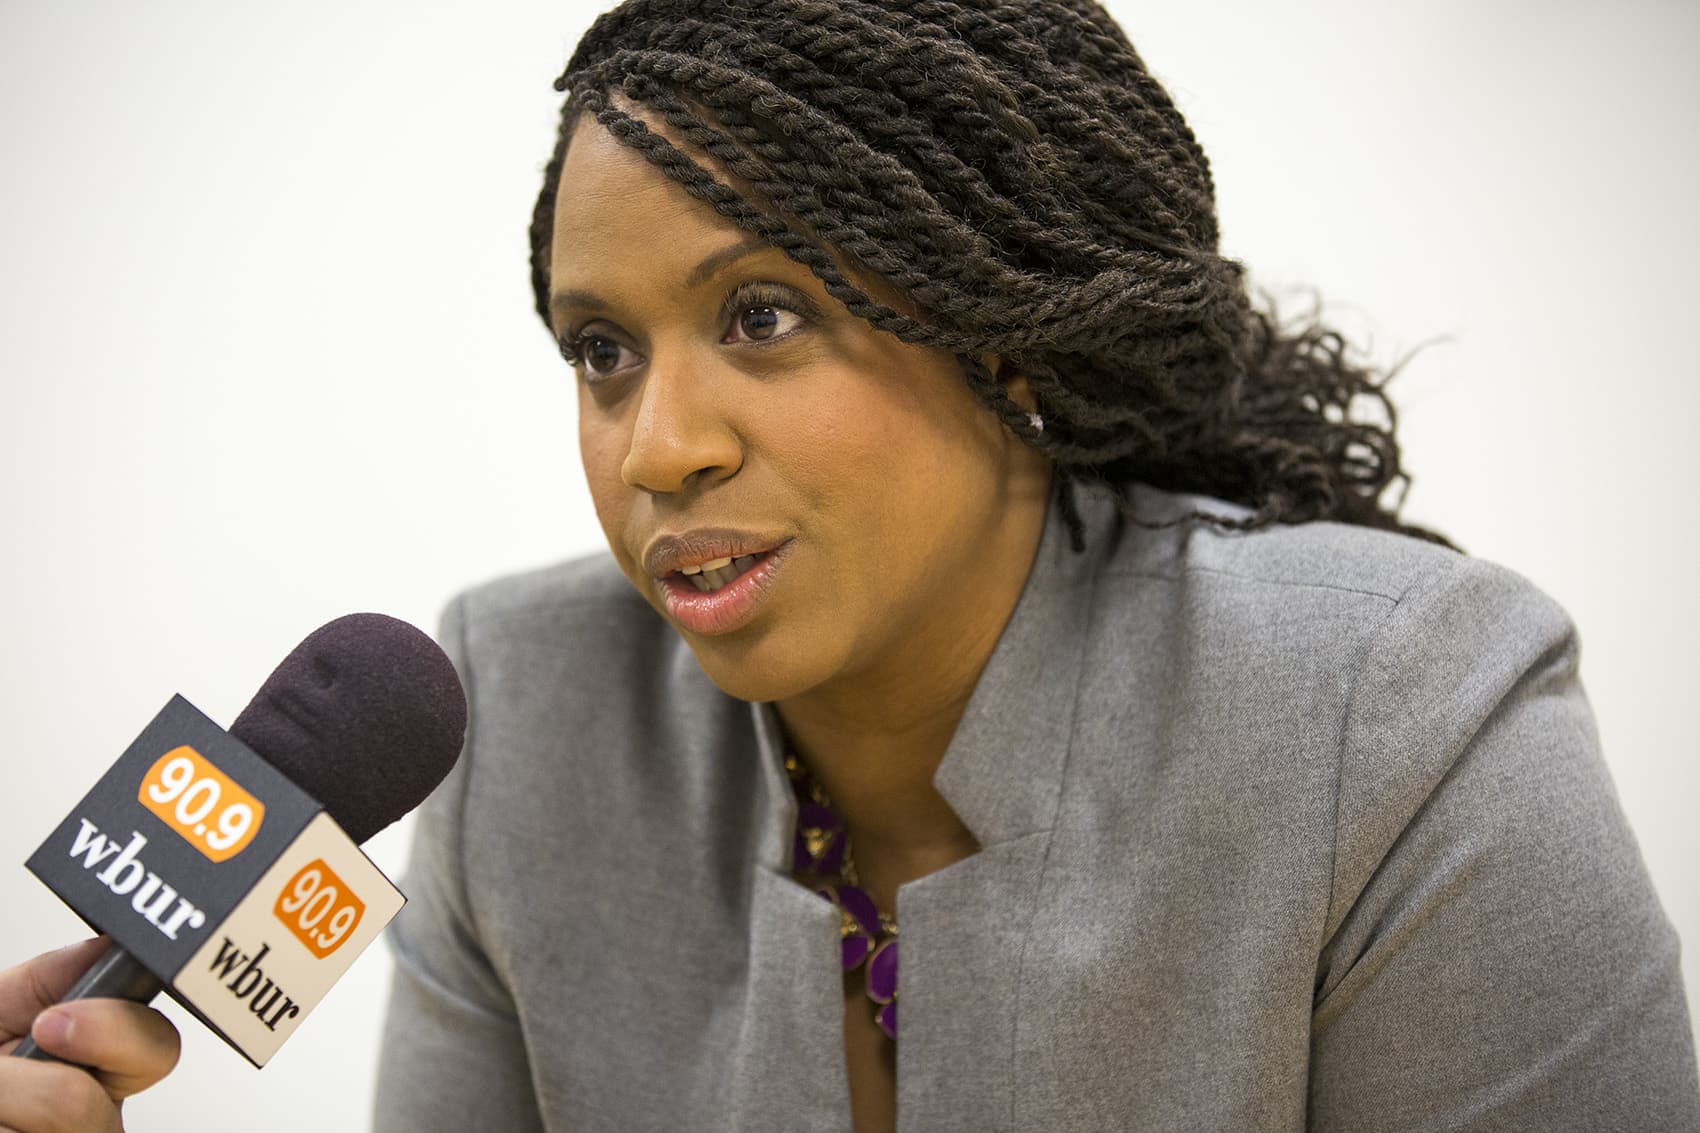 In Congressional Run, Pressley Says She Wants To Take Her Work 'Higher